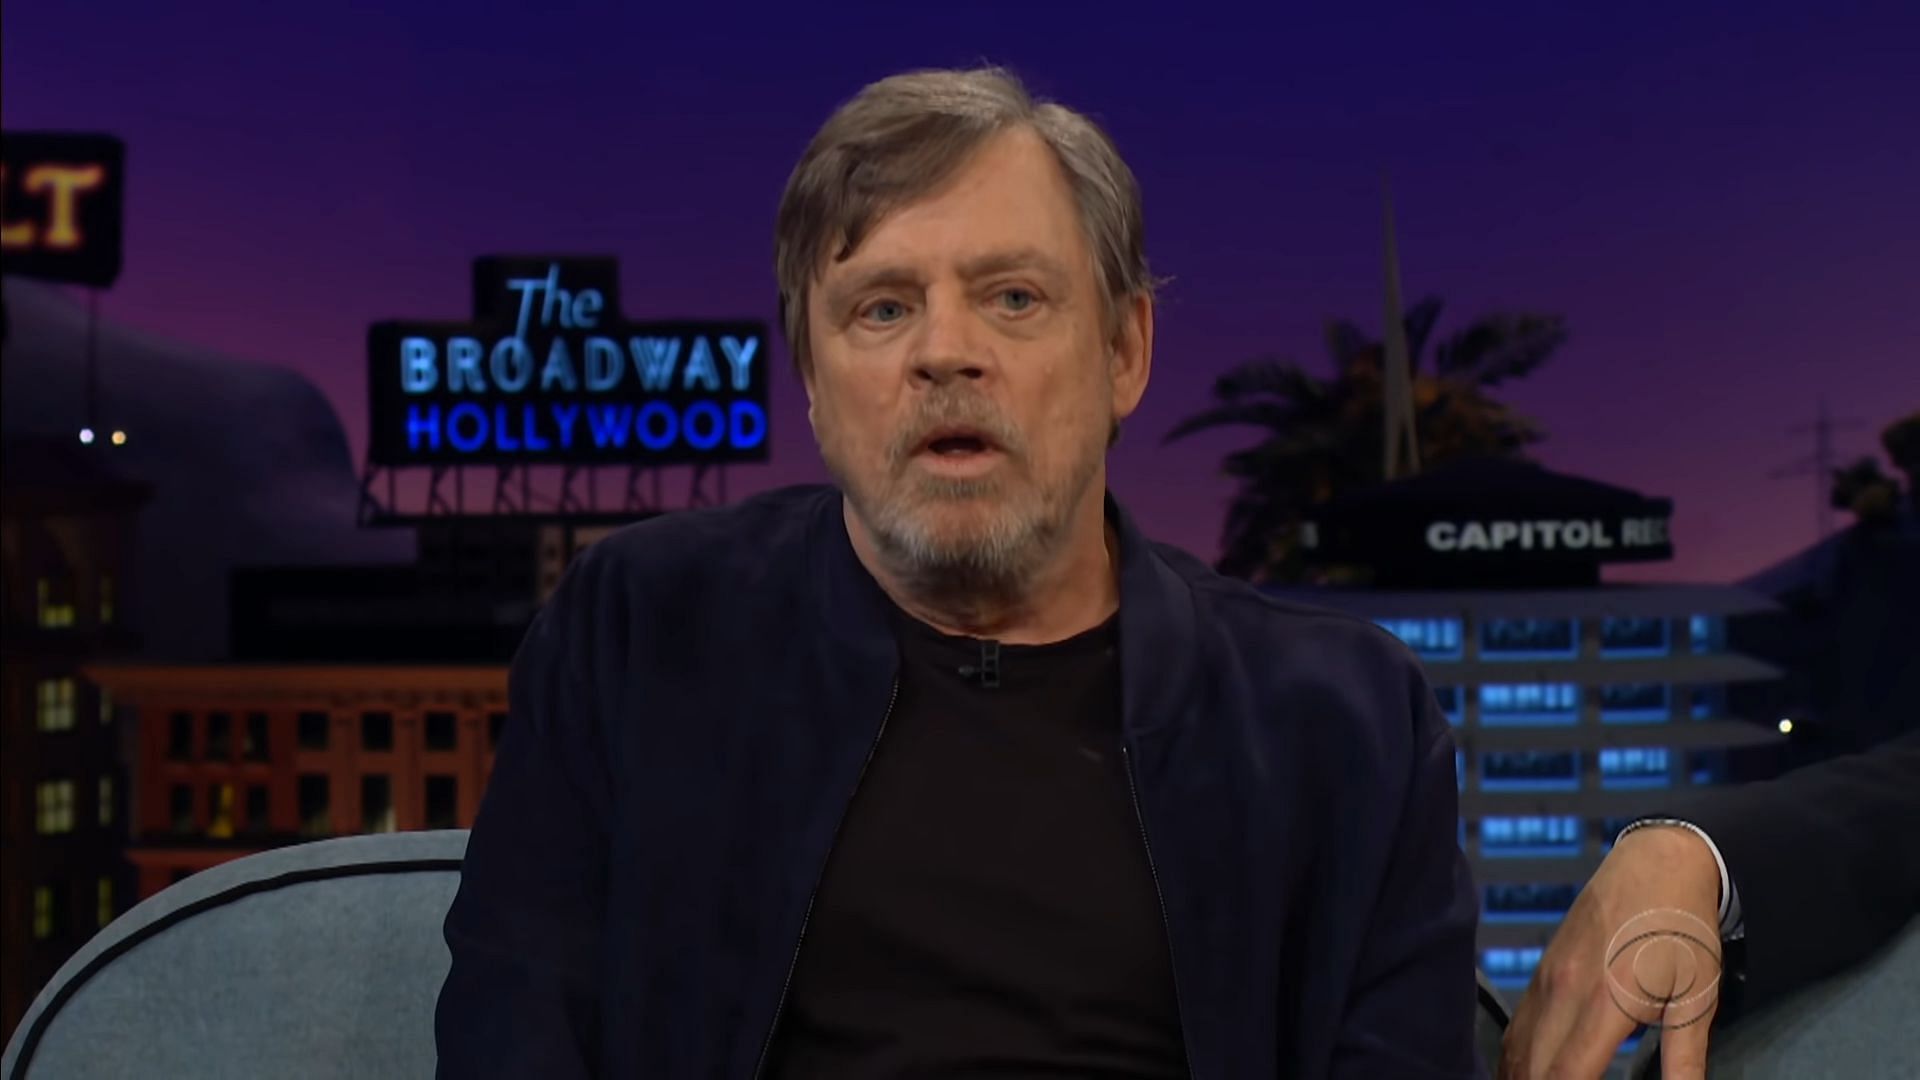 Mark Hamill during his appearance in The Late Late Show with James Corden (Image via The Late Late Show with James Corden/YouTube)